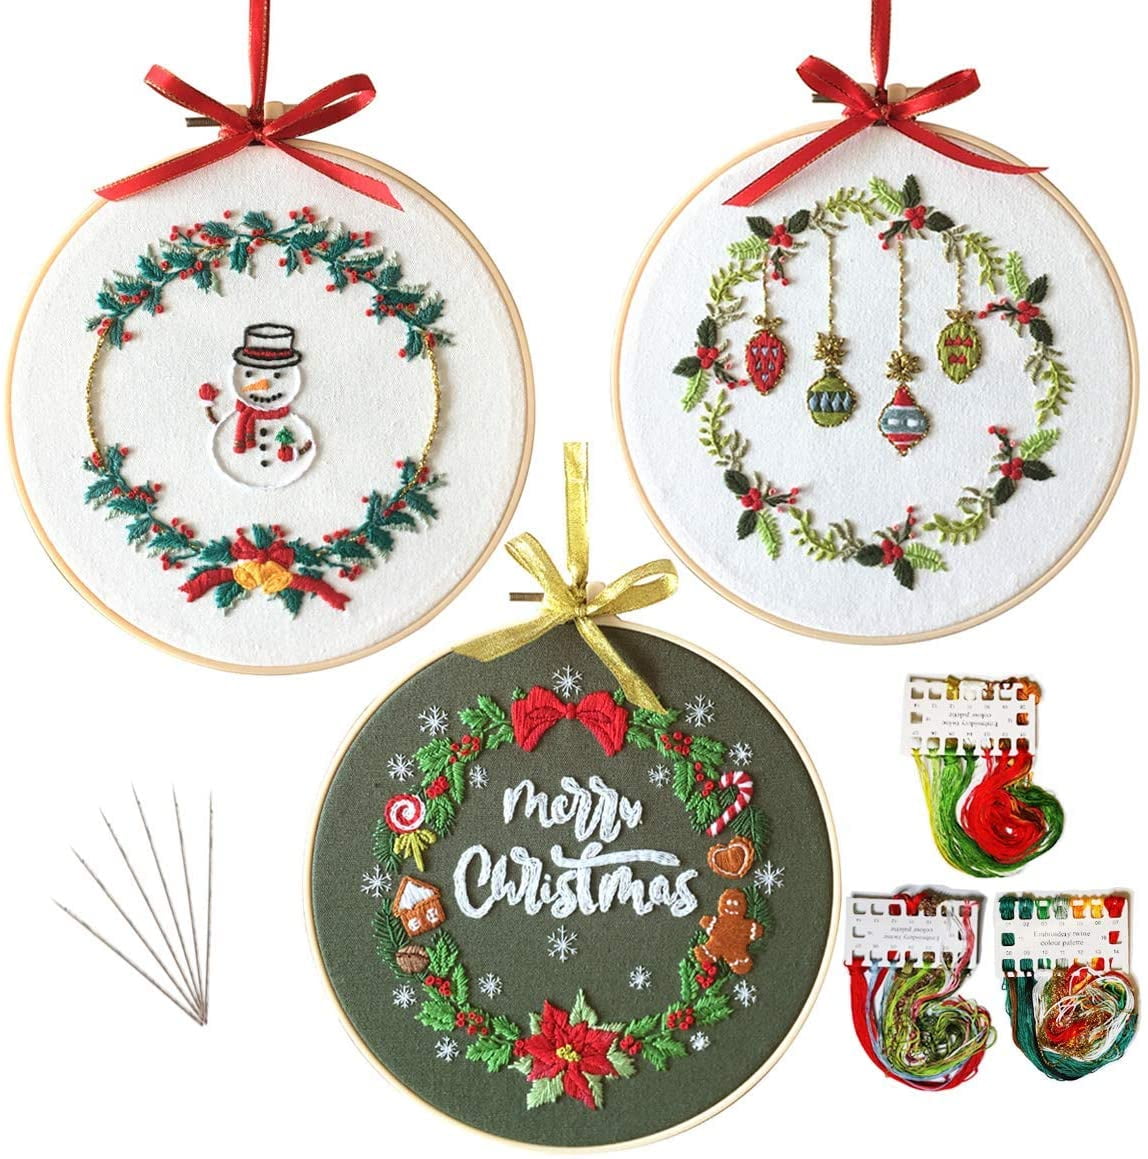 EXCEART Hand Embroidery Kit Embroidery Kits with Patterns Christmas Cross  Stitch Kits Beginner Cartoon DIY Materials Christmas Cross Patterns Holiday